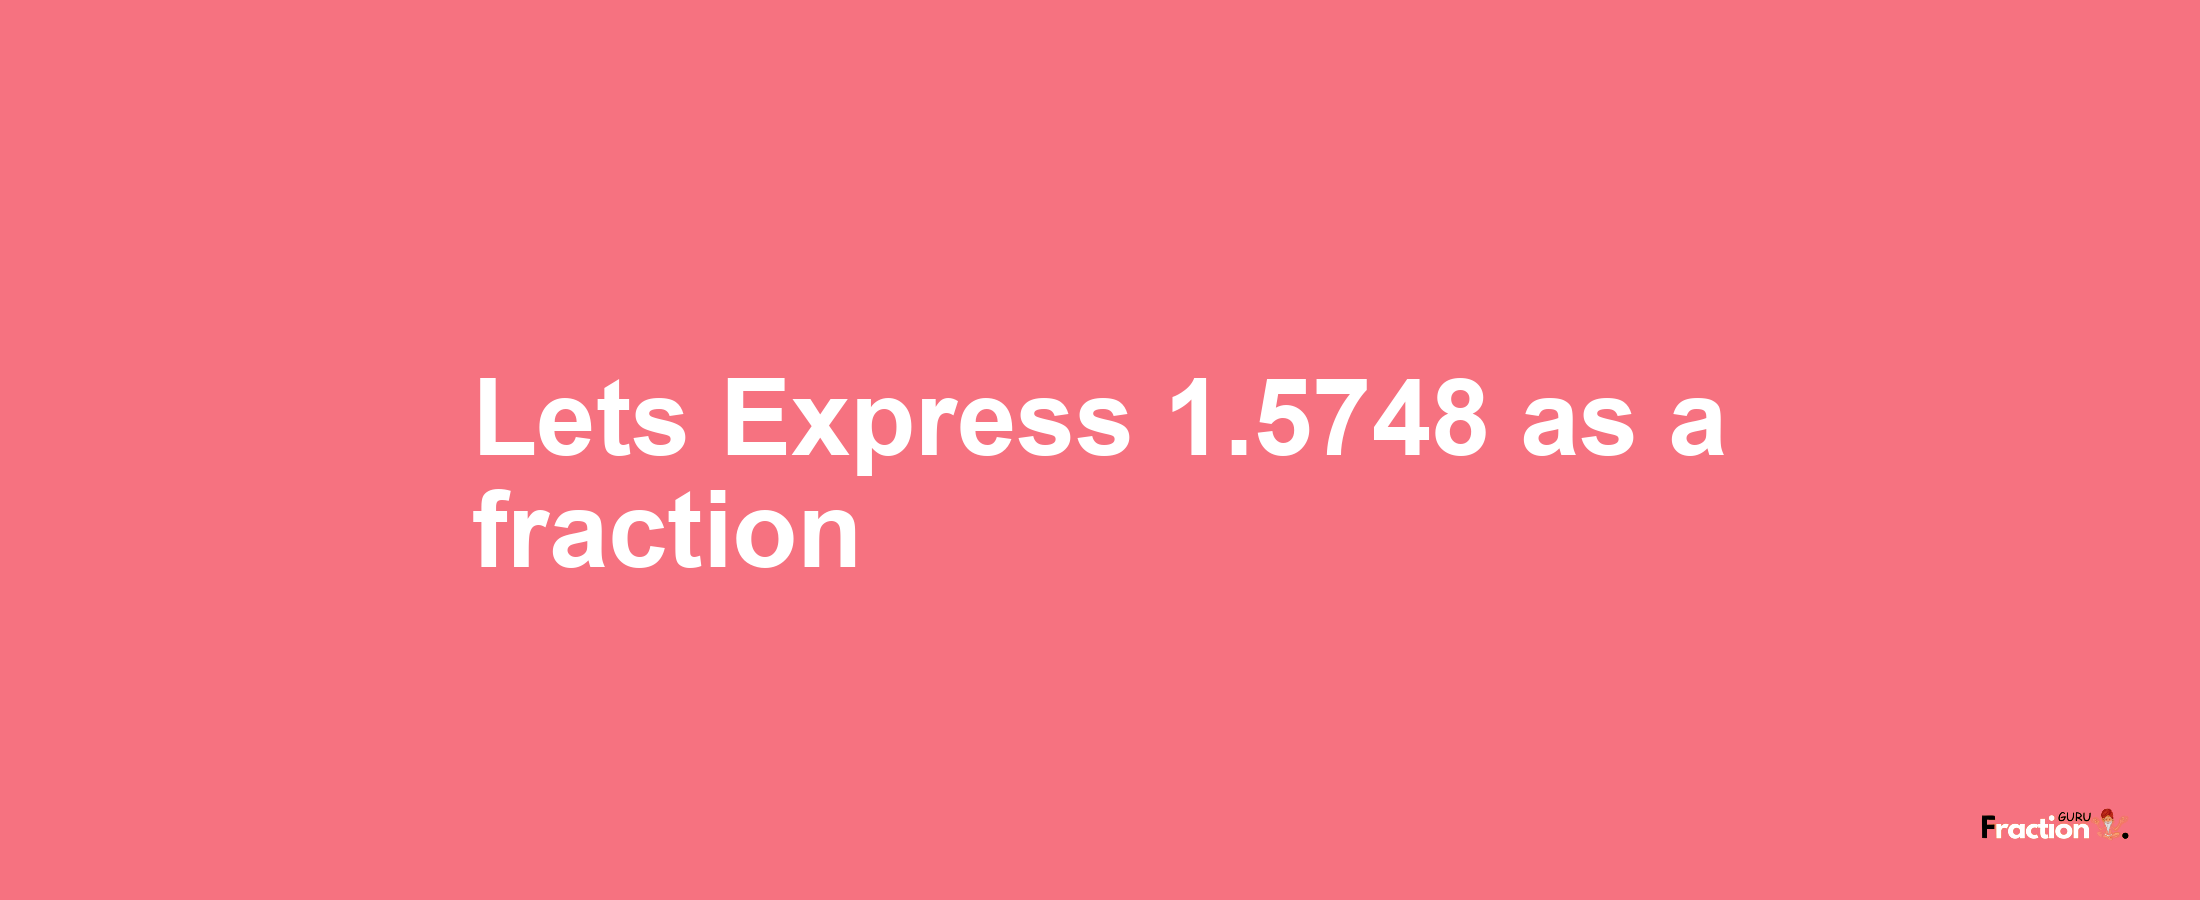 Lets Express 1.5748 as afraction